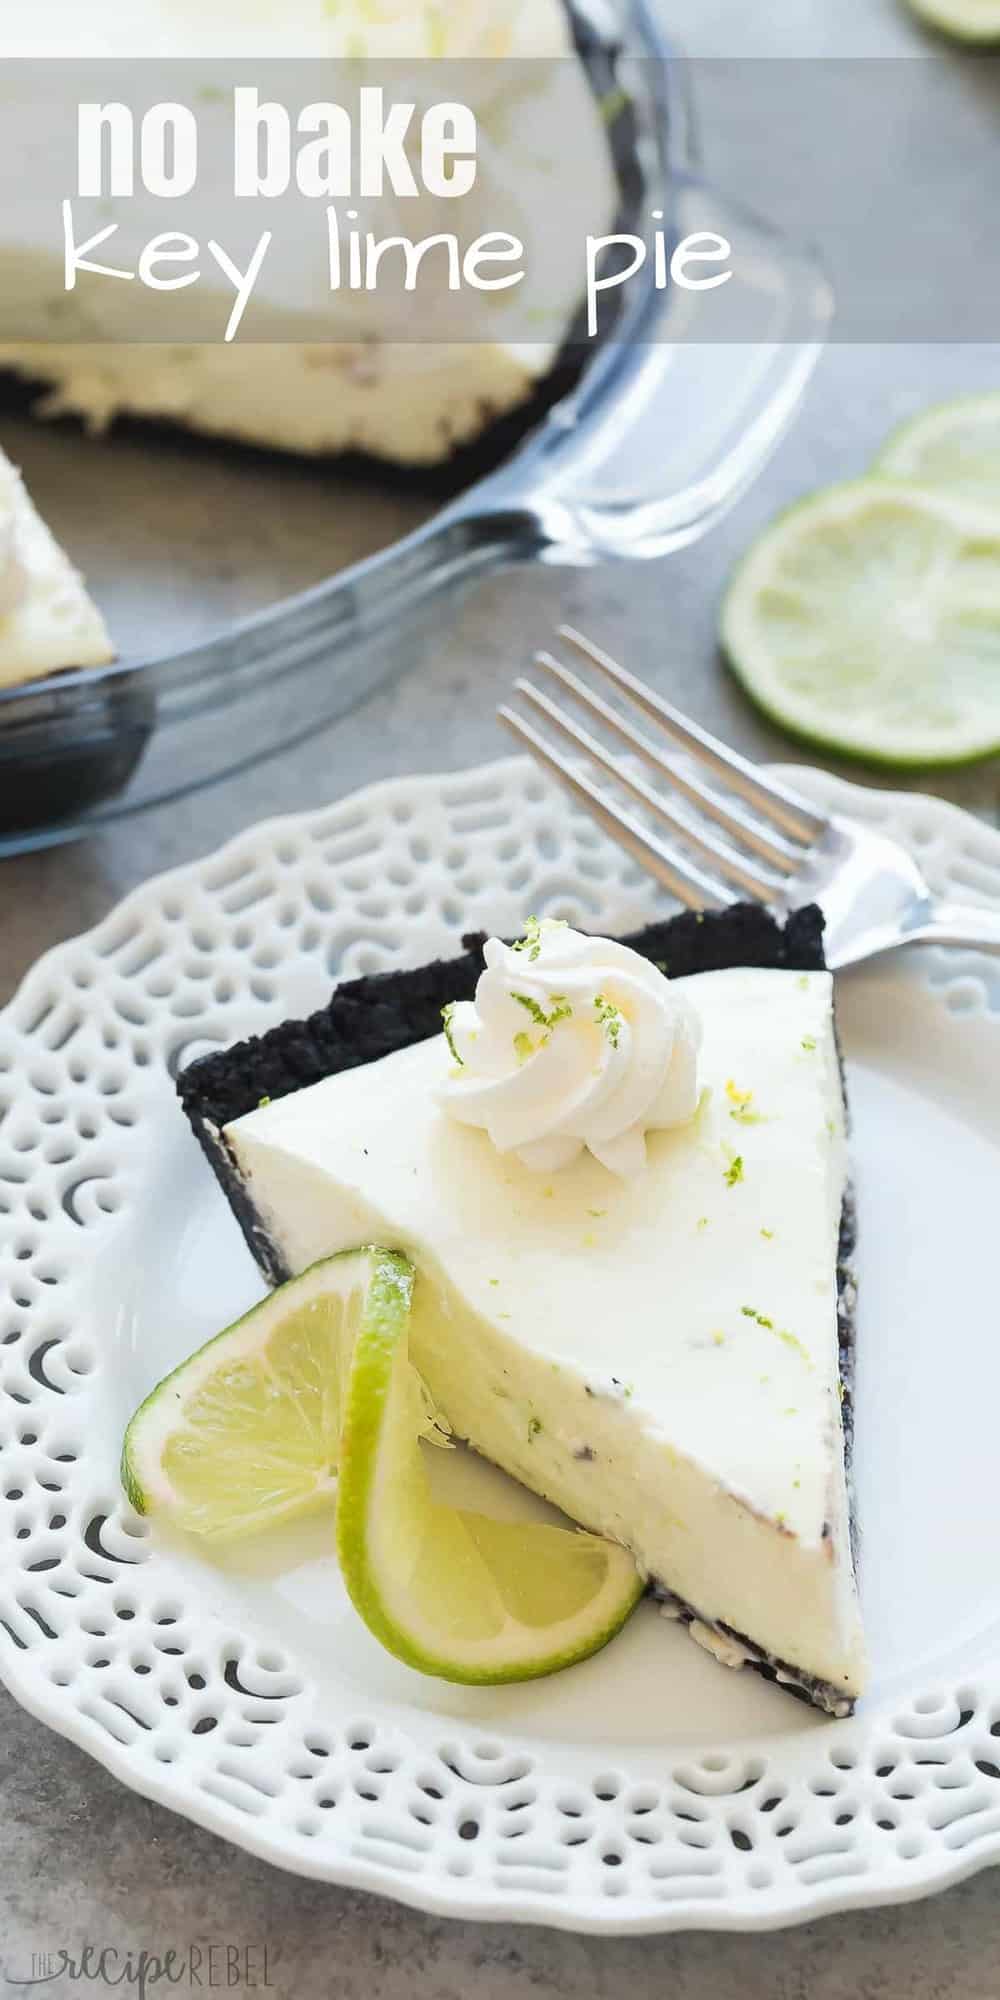 tall image of no bake key lime pie with slice on white plate